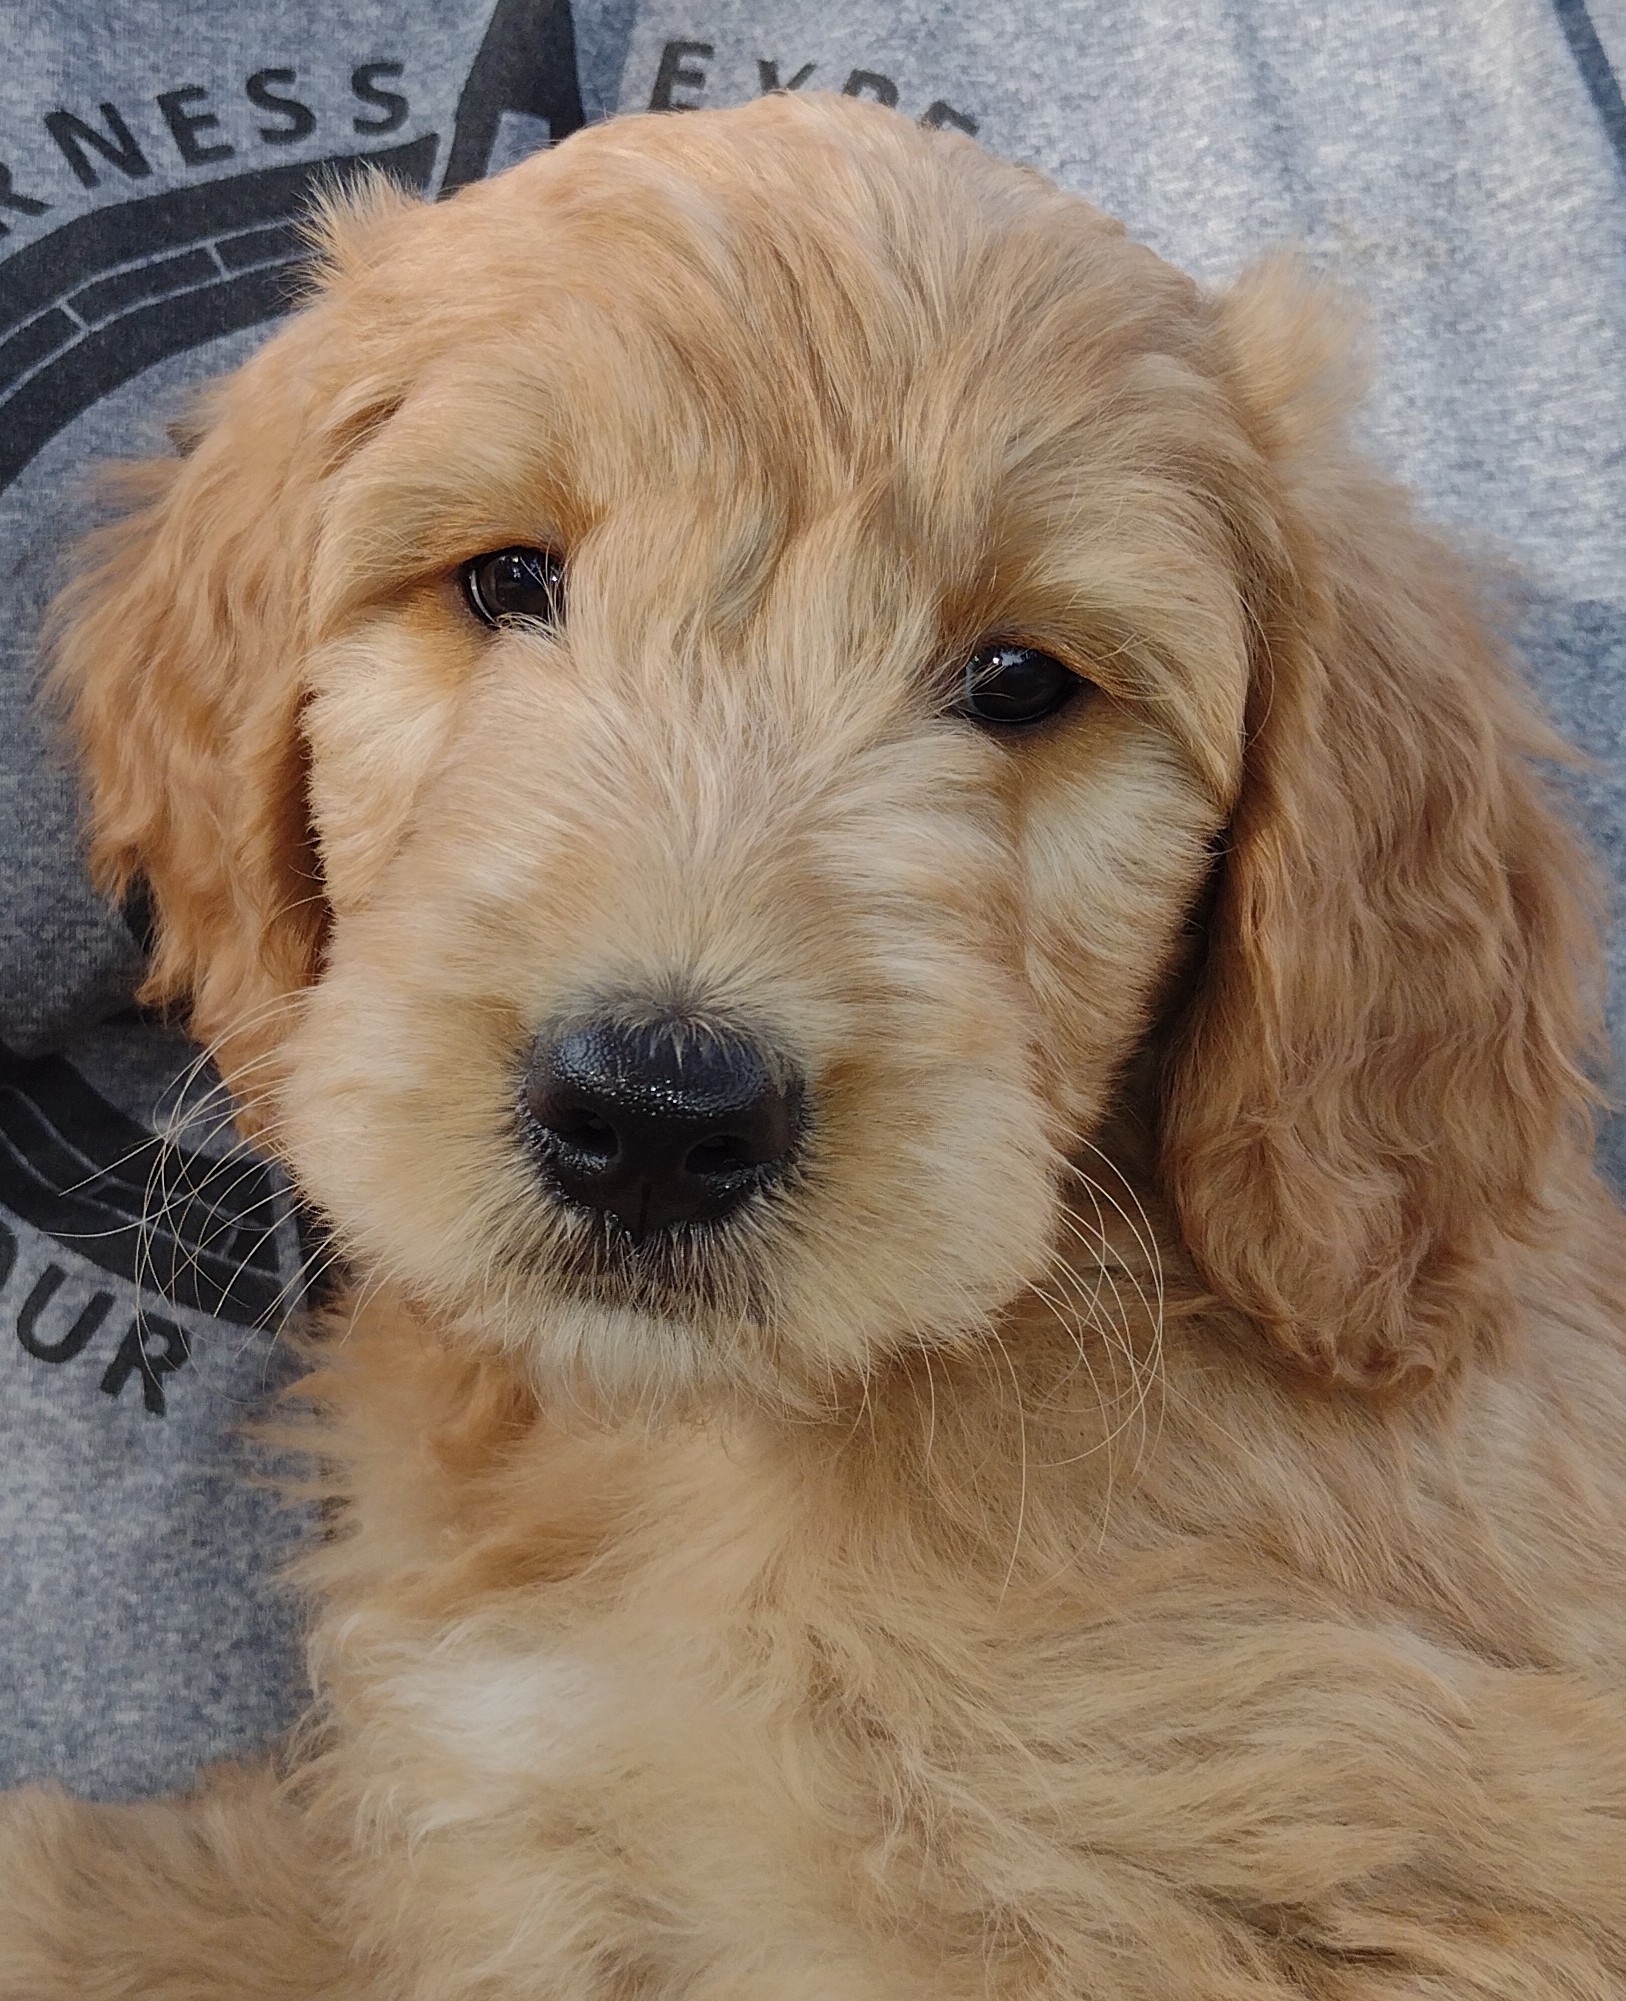 CONGRATULATIONS Mona From Pillager On Your New Goldendoodle Puppy From Red Cedar Farms, Hutchinson, MN